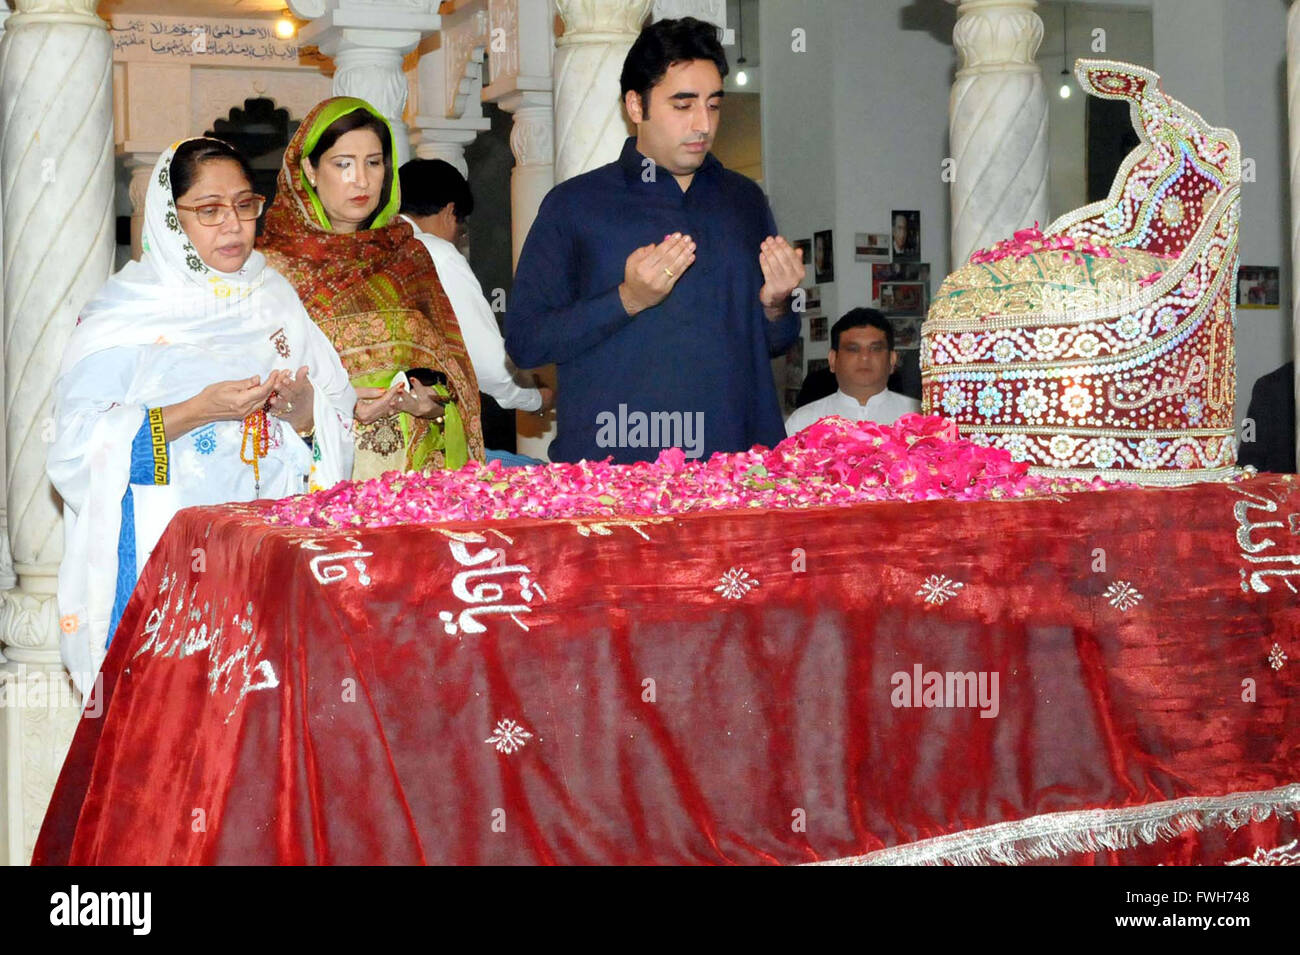 Peoples Party (PPP) Chairman, Bilawal Bhutto Zardari and MNA Faryal Talpur along with other offers Fateha at the grave of Peoples Party (PPP) Founder, Zulfiqar Ali Bhutto, during their visit at his shrine in Garhi Khuda Bux on Tuesday, April 05, 2016. Stock Photo